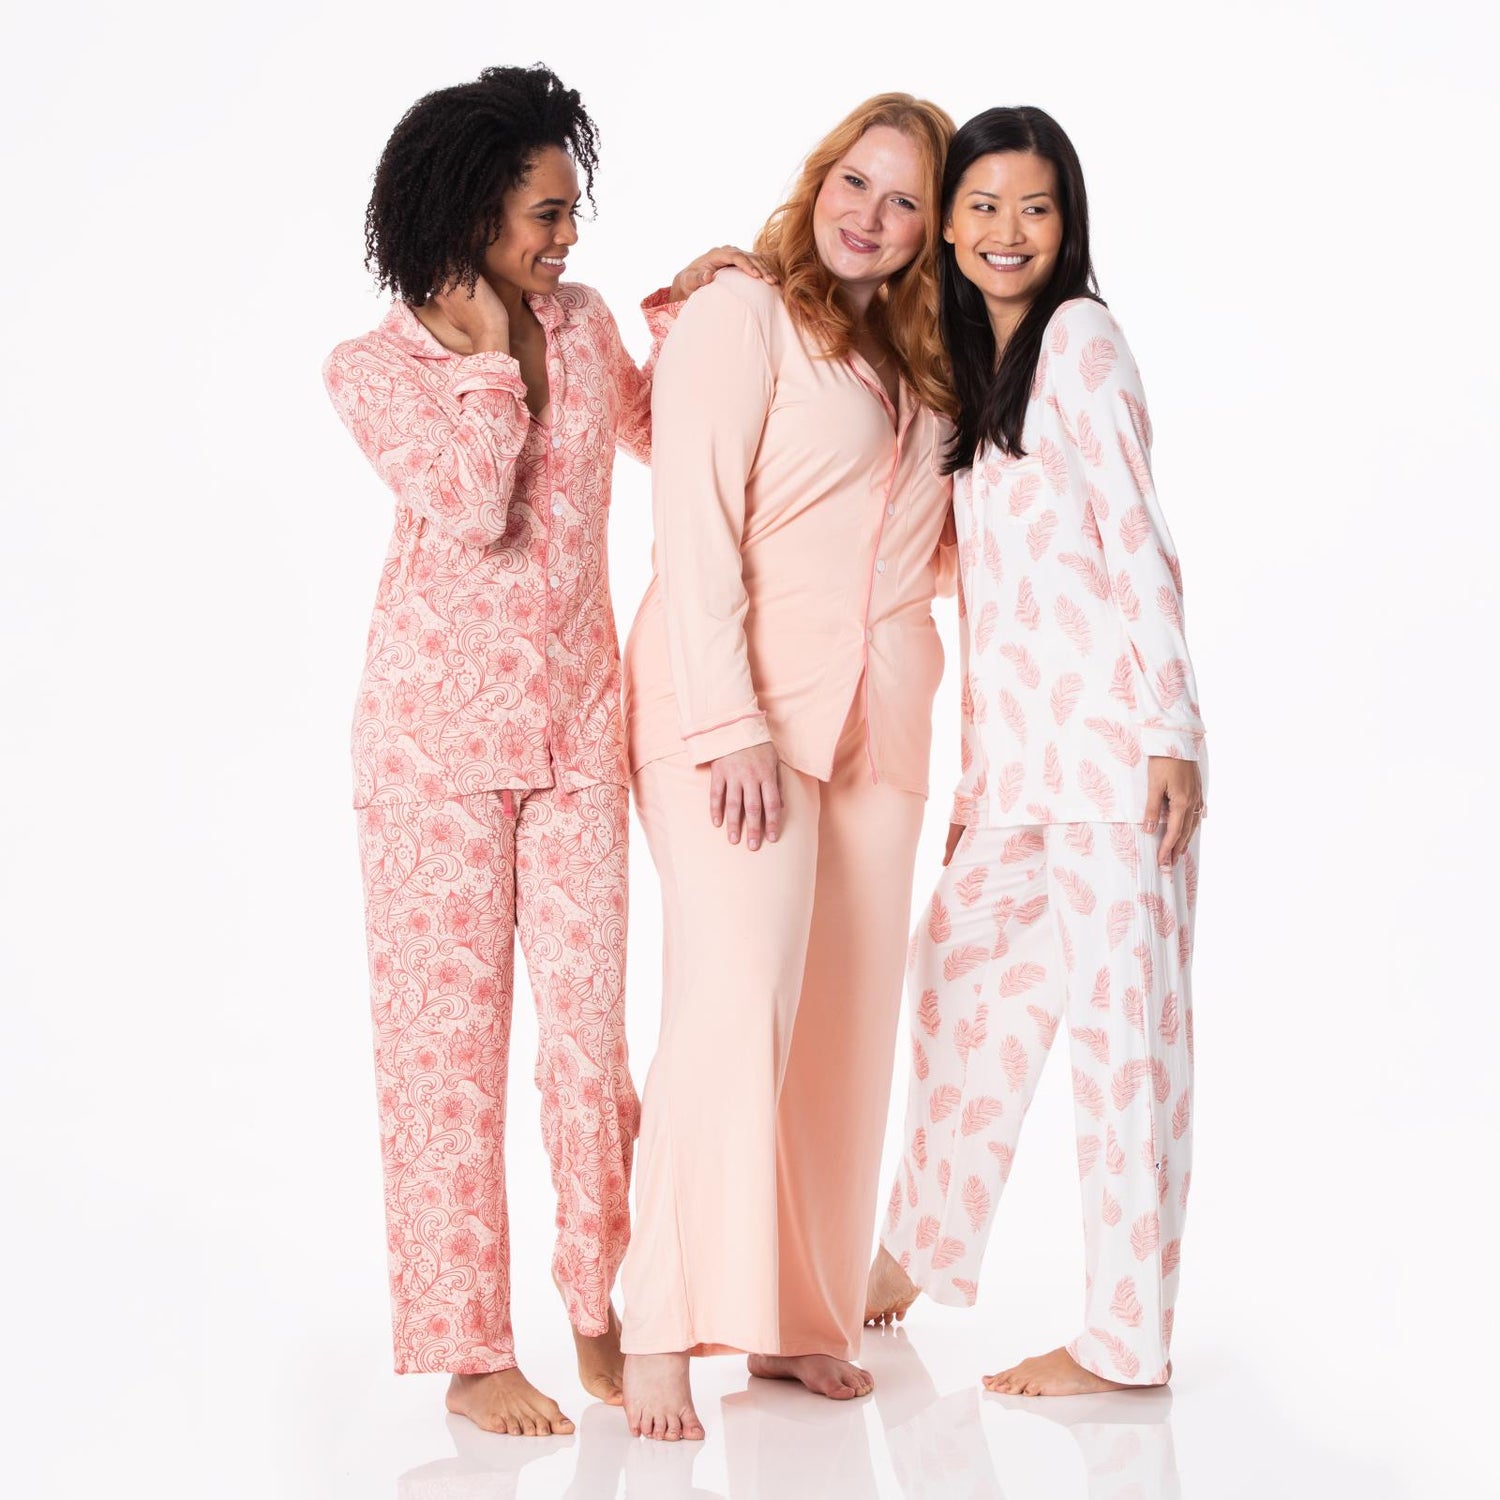 Women's Print Long Sleeve Collared Pajama Set in Peach Blossom Lace